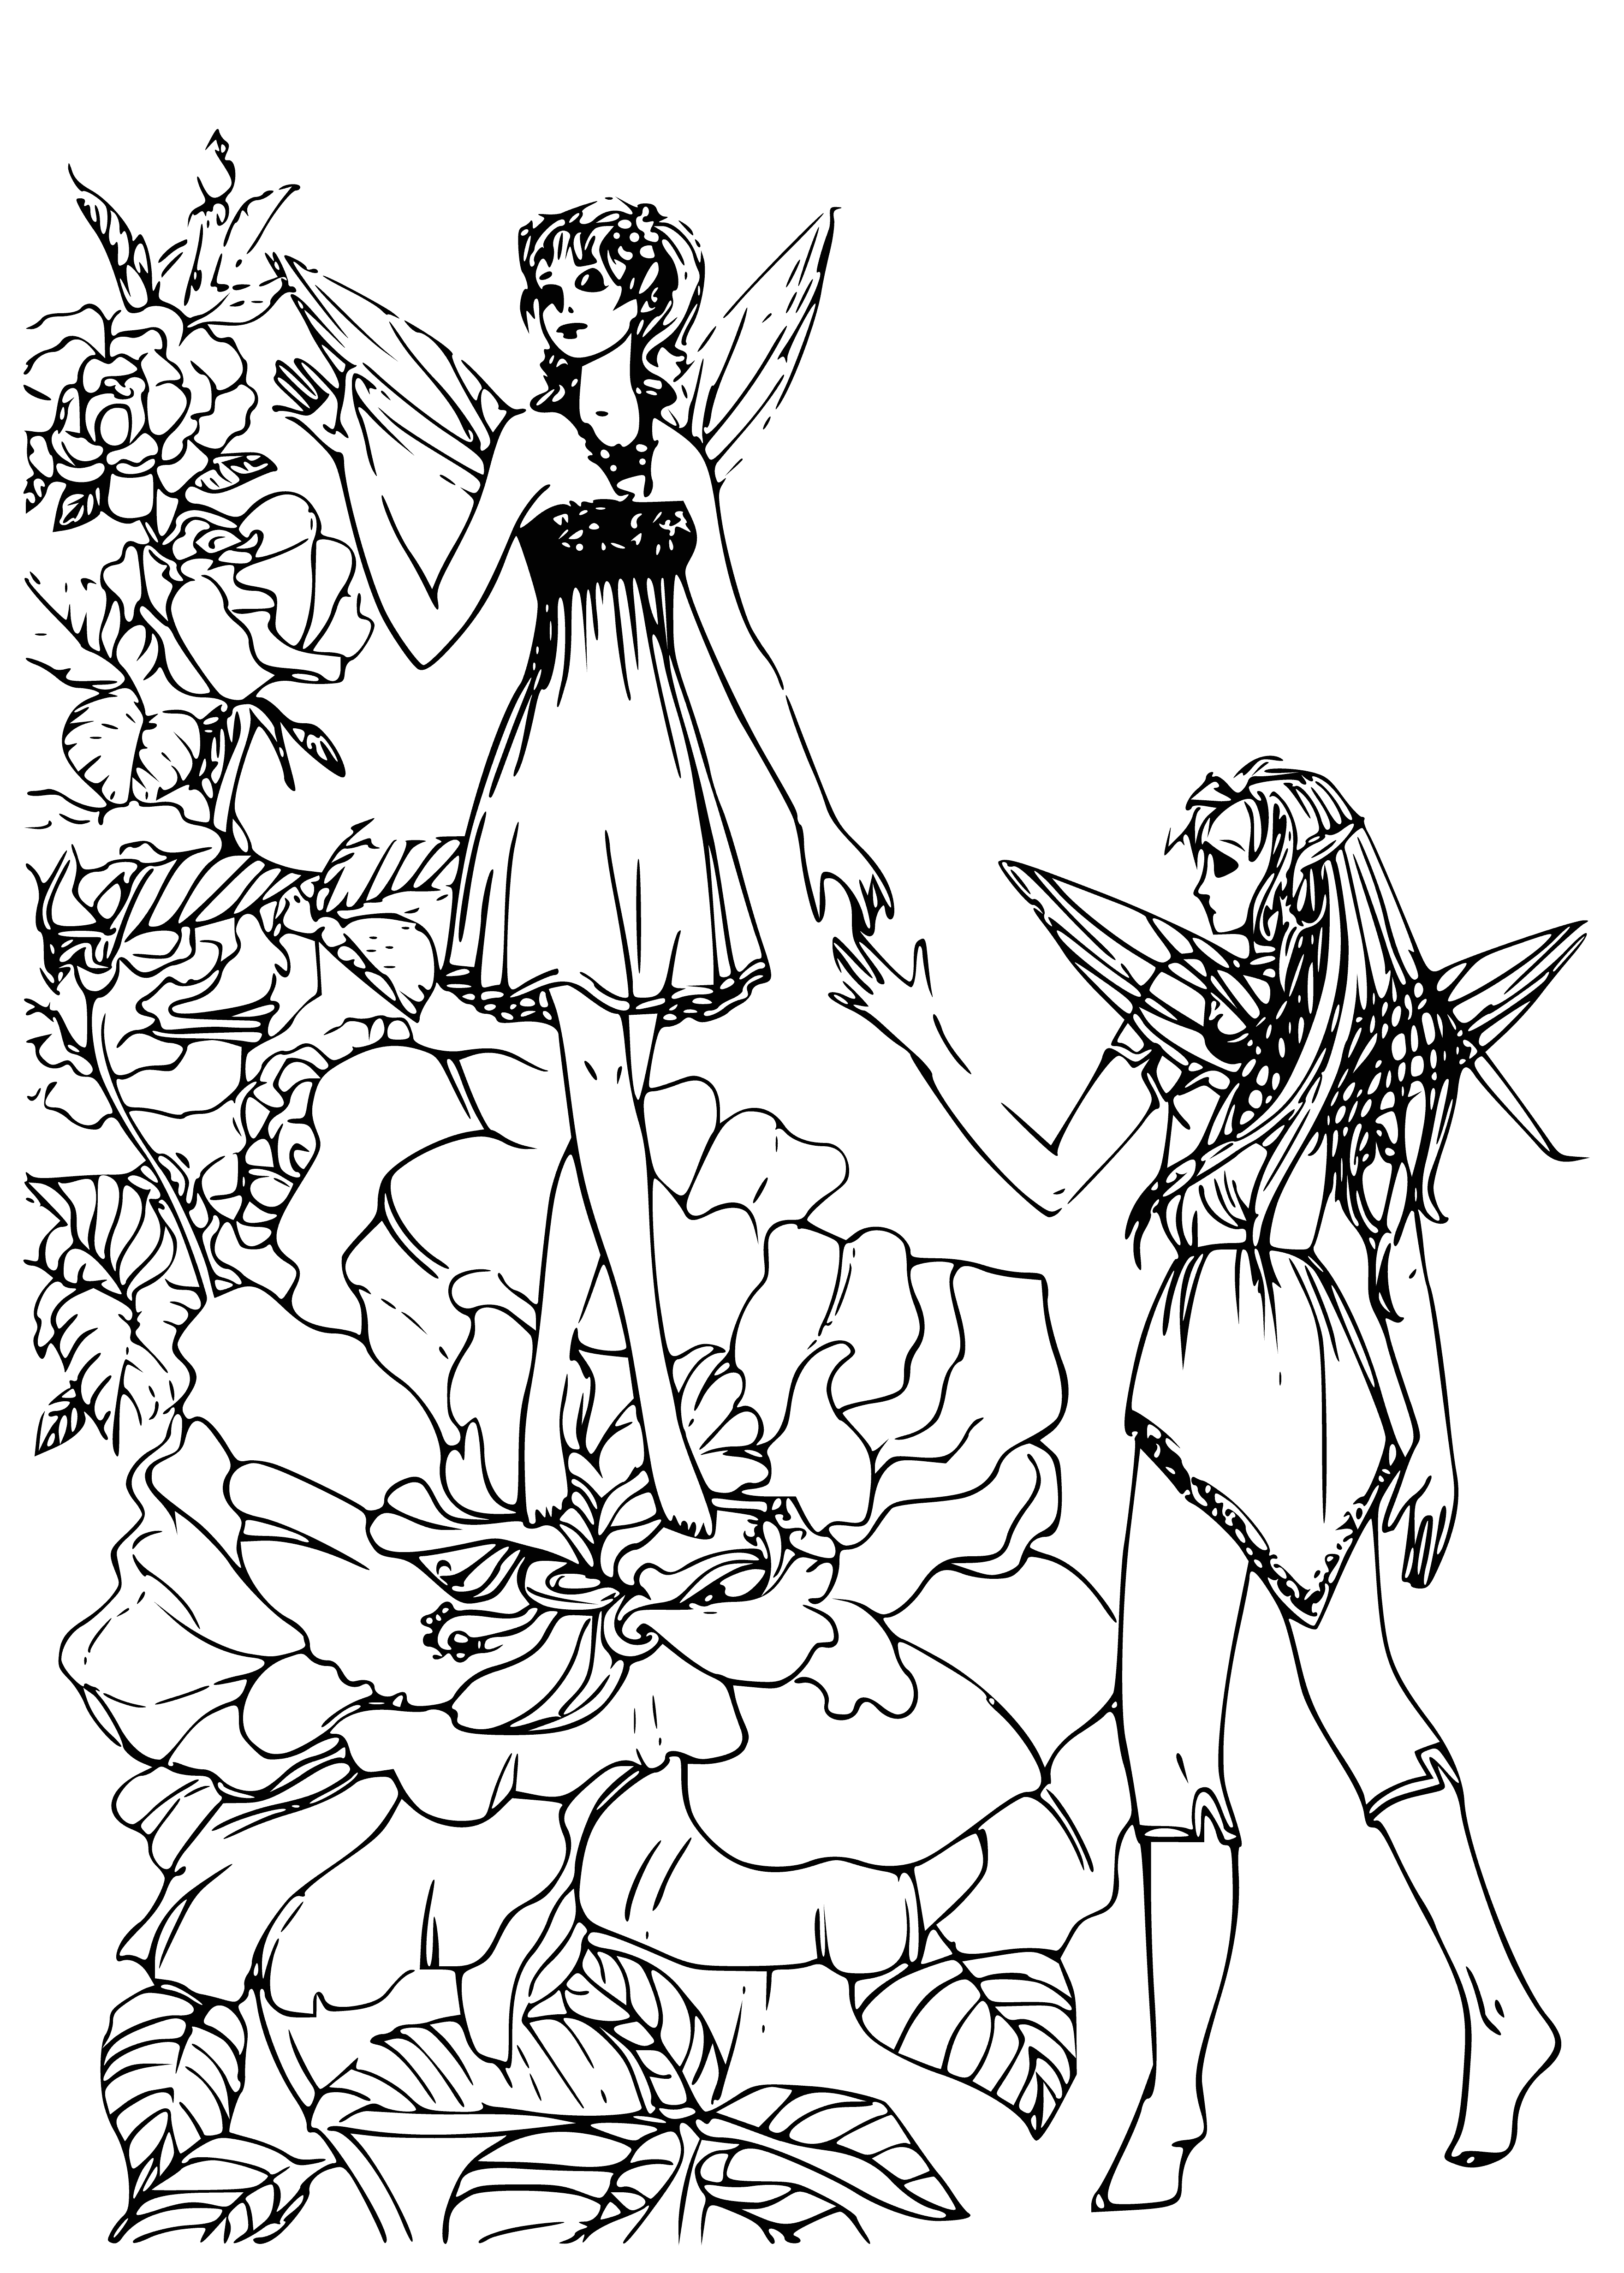 Elf and Thumbelina coloring page